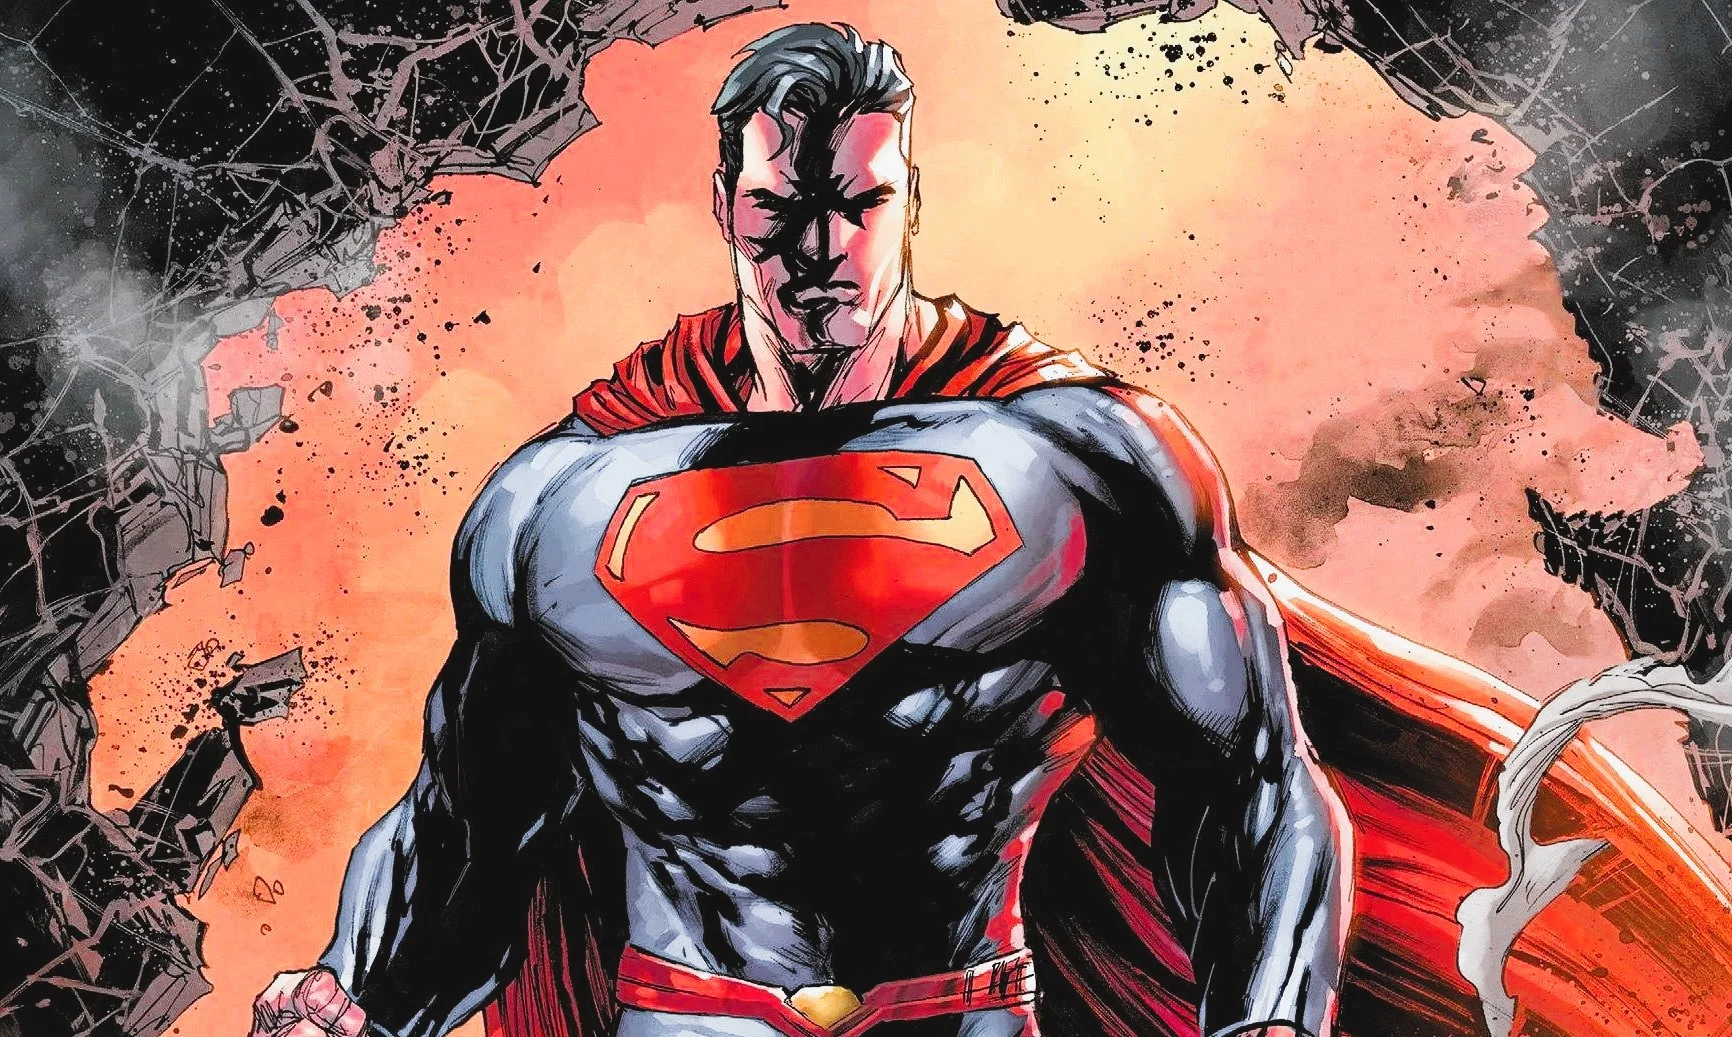 Could Superman pretty much win any fight against anyone and anything?